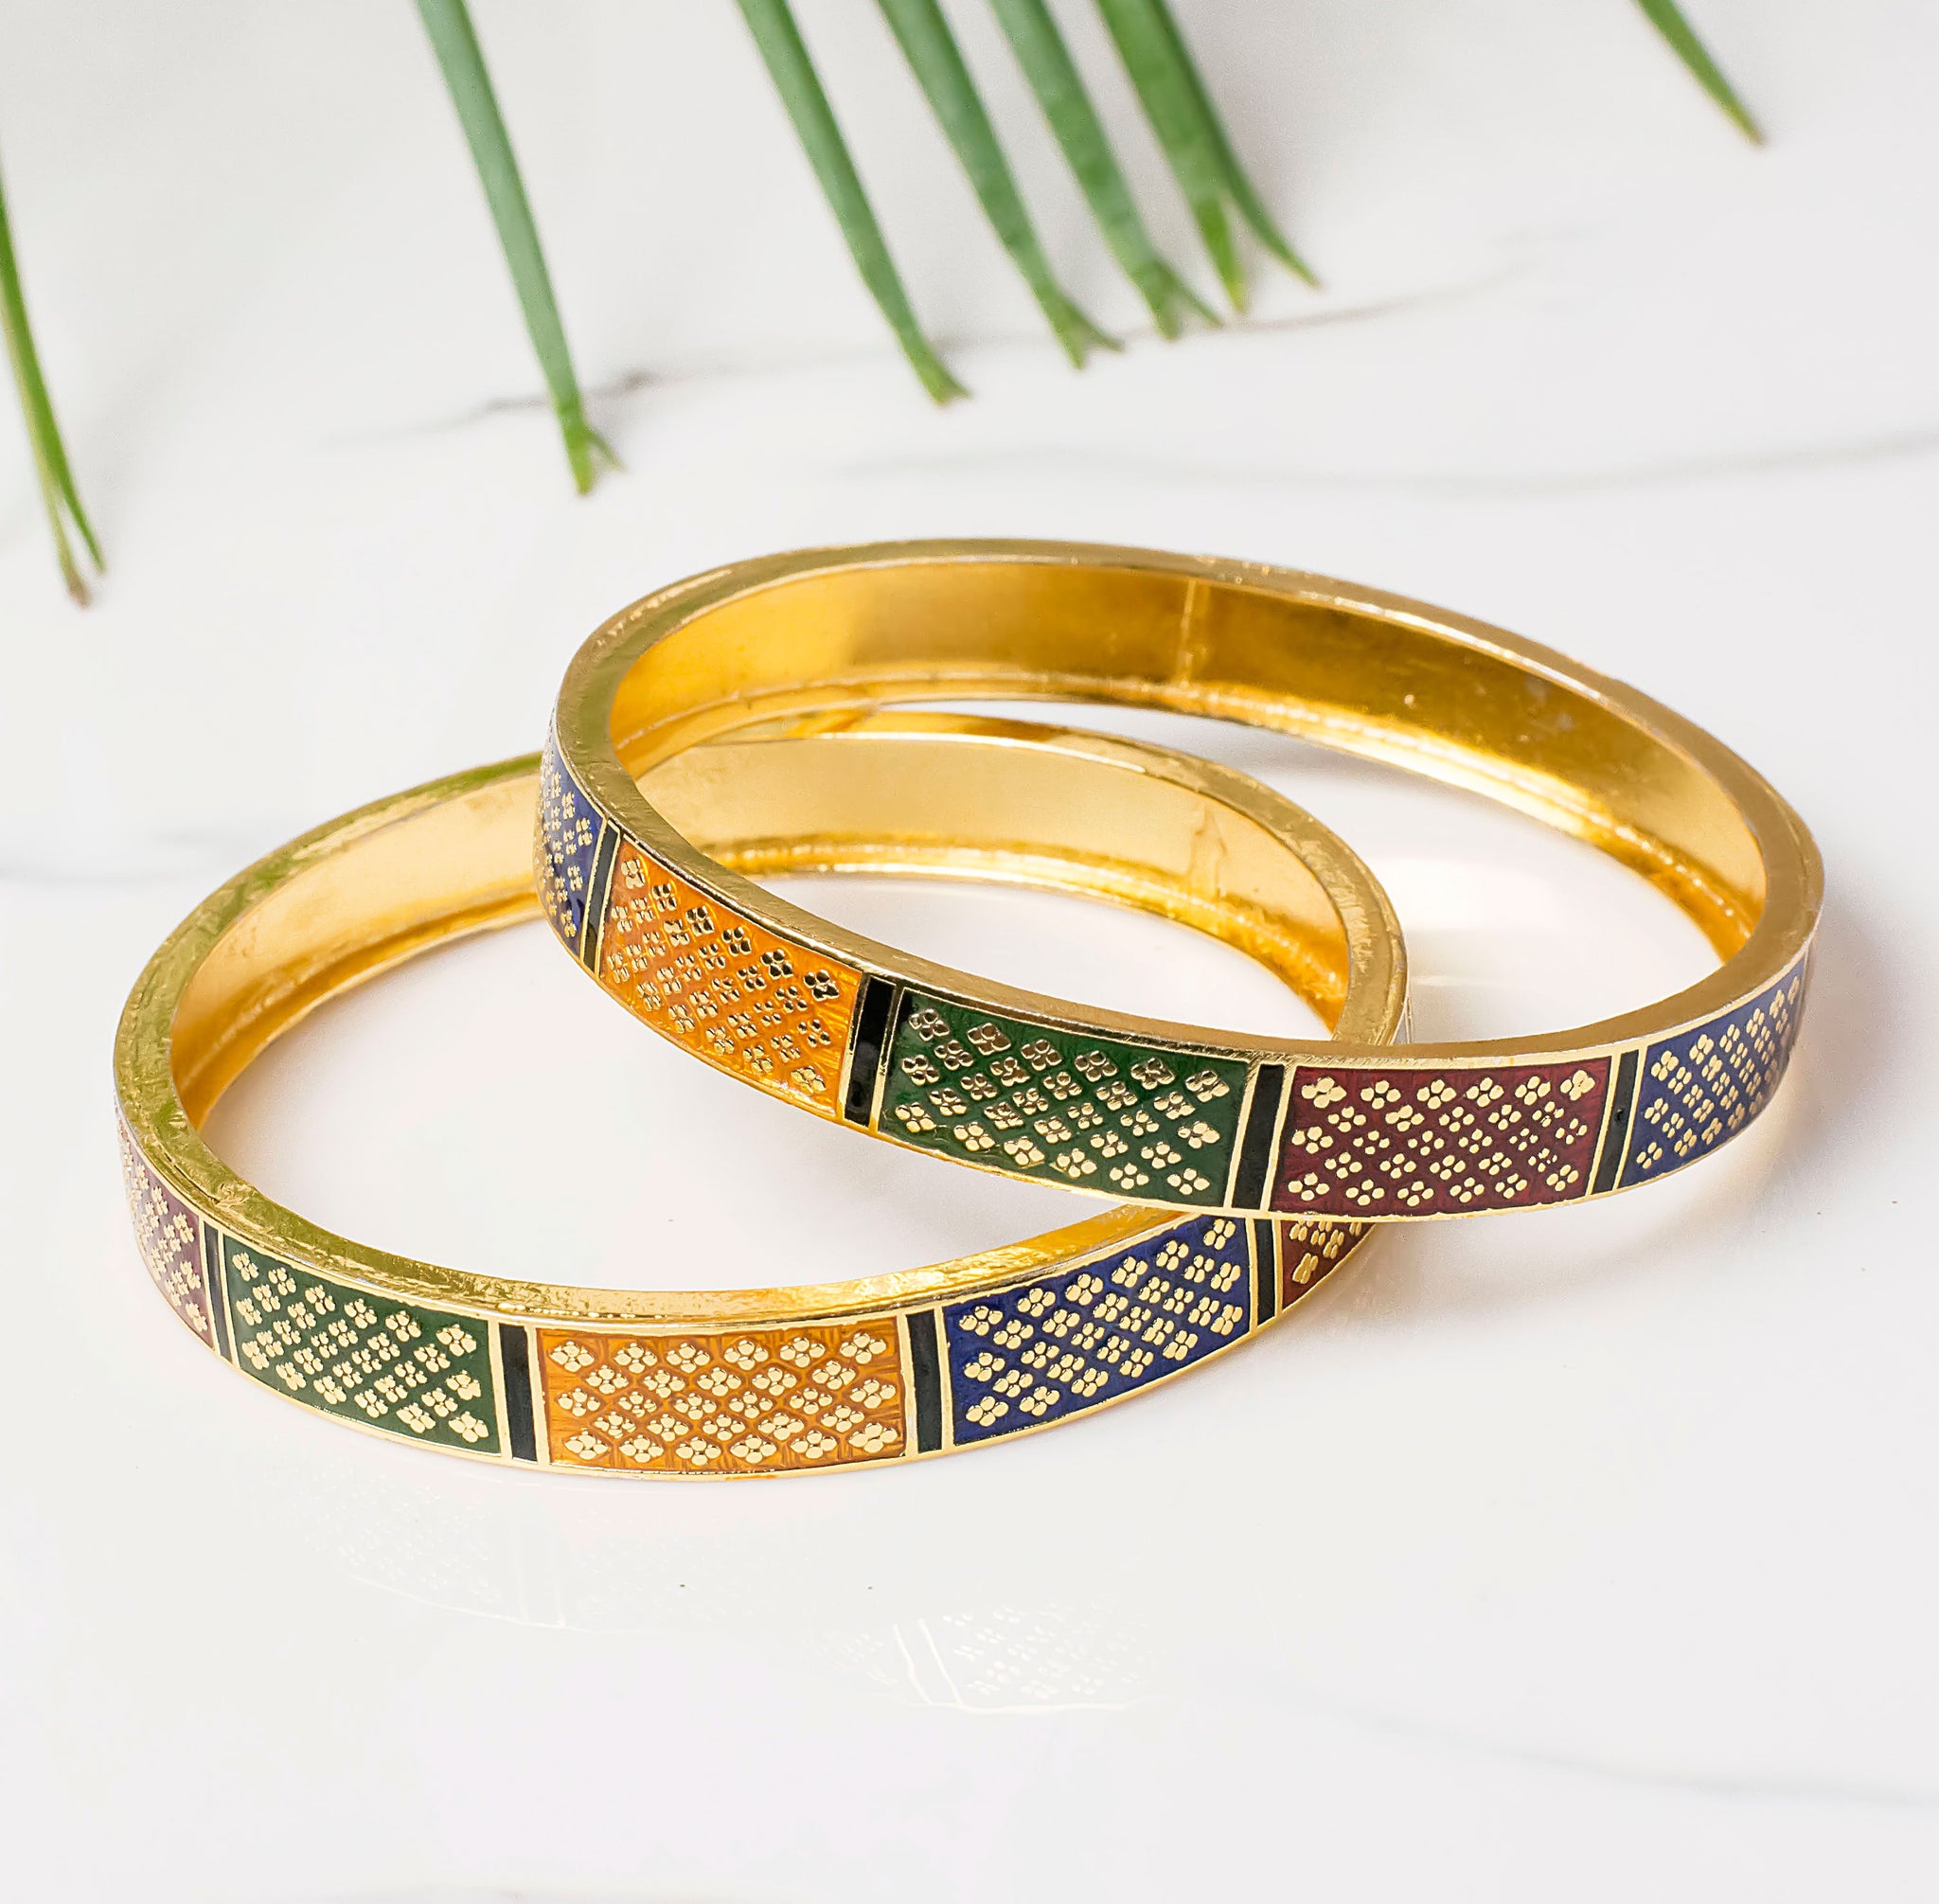 Gold Bracelet Designs for Daily Wear: A Must Add To Everyday Wardrobe –  Blingvine